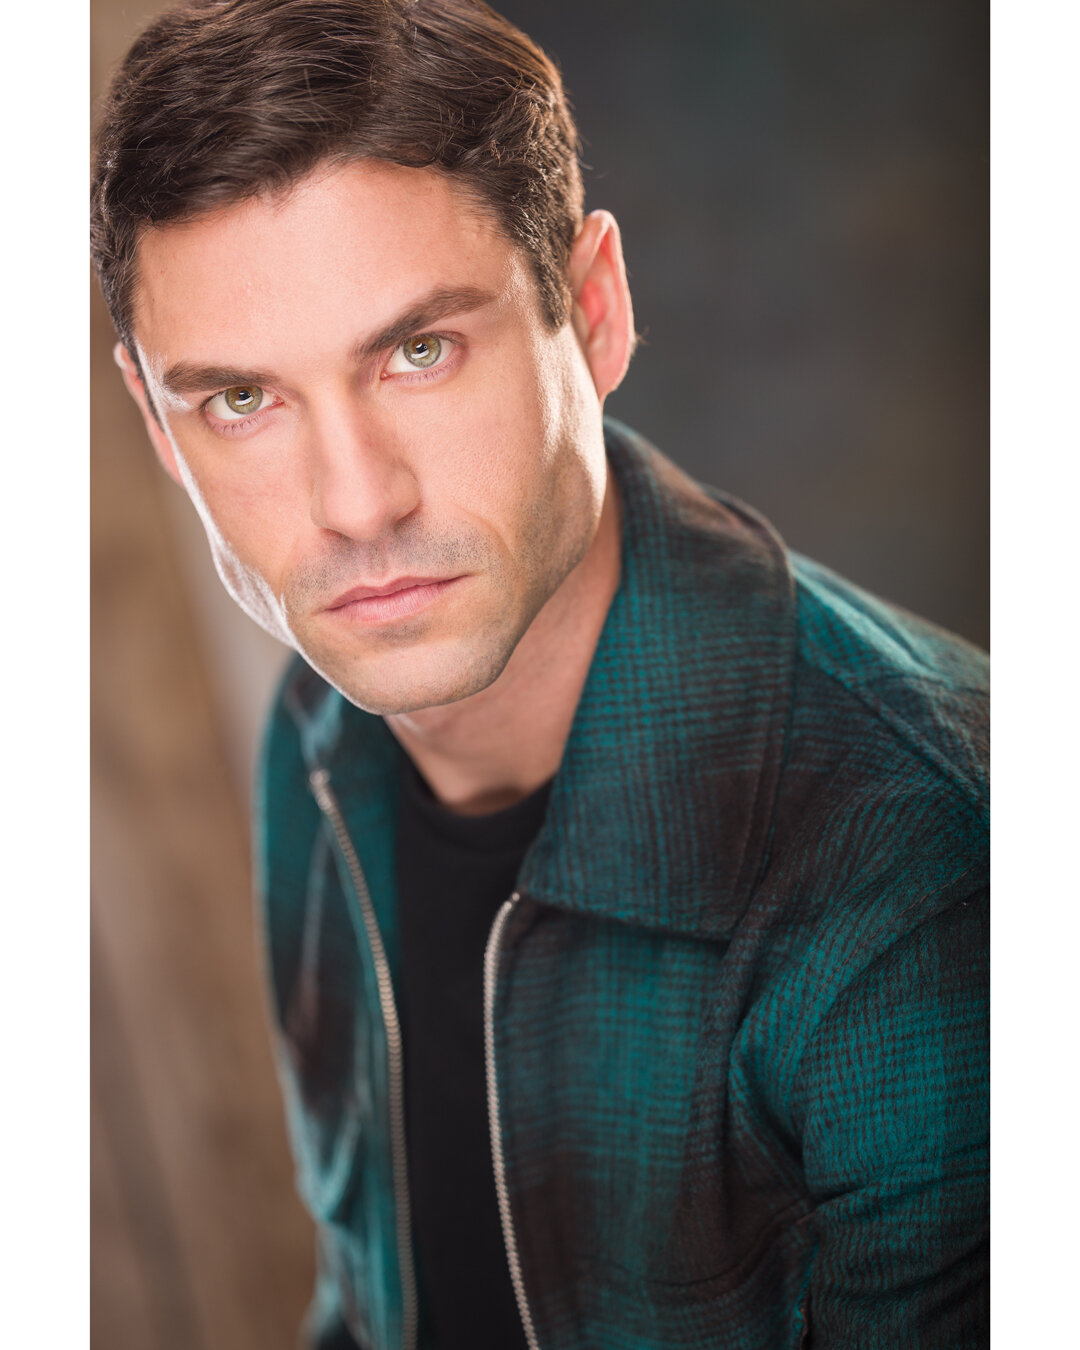 Let Me Help You Get In The Room! (or wherever you tape your auditions!)

Headshots for Actors &amp; Creatives
Los Angeles, California

BOOK YOUR SHOOT TODAY
Actor: Patrick M
Grooming: @sam.cota

www.photosbyjamaal.com

#headshots #headshot #audition 